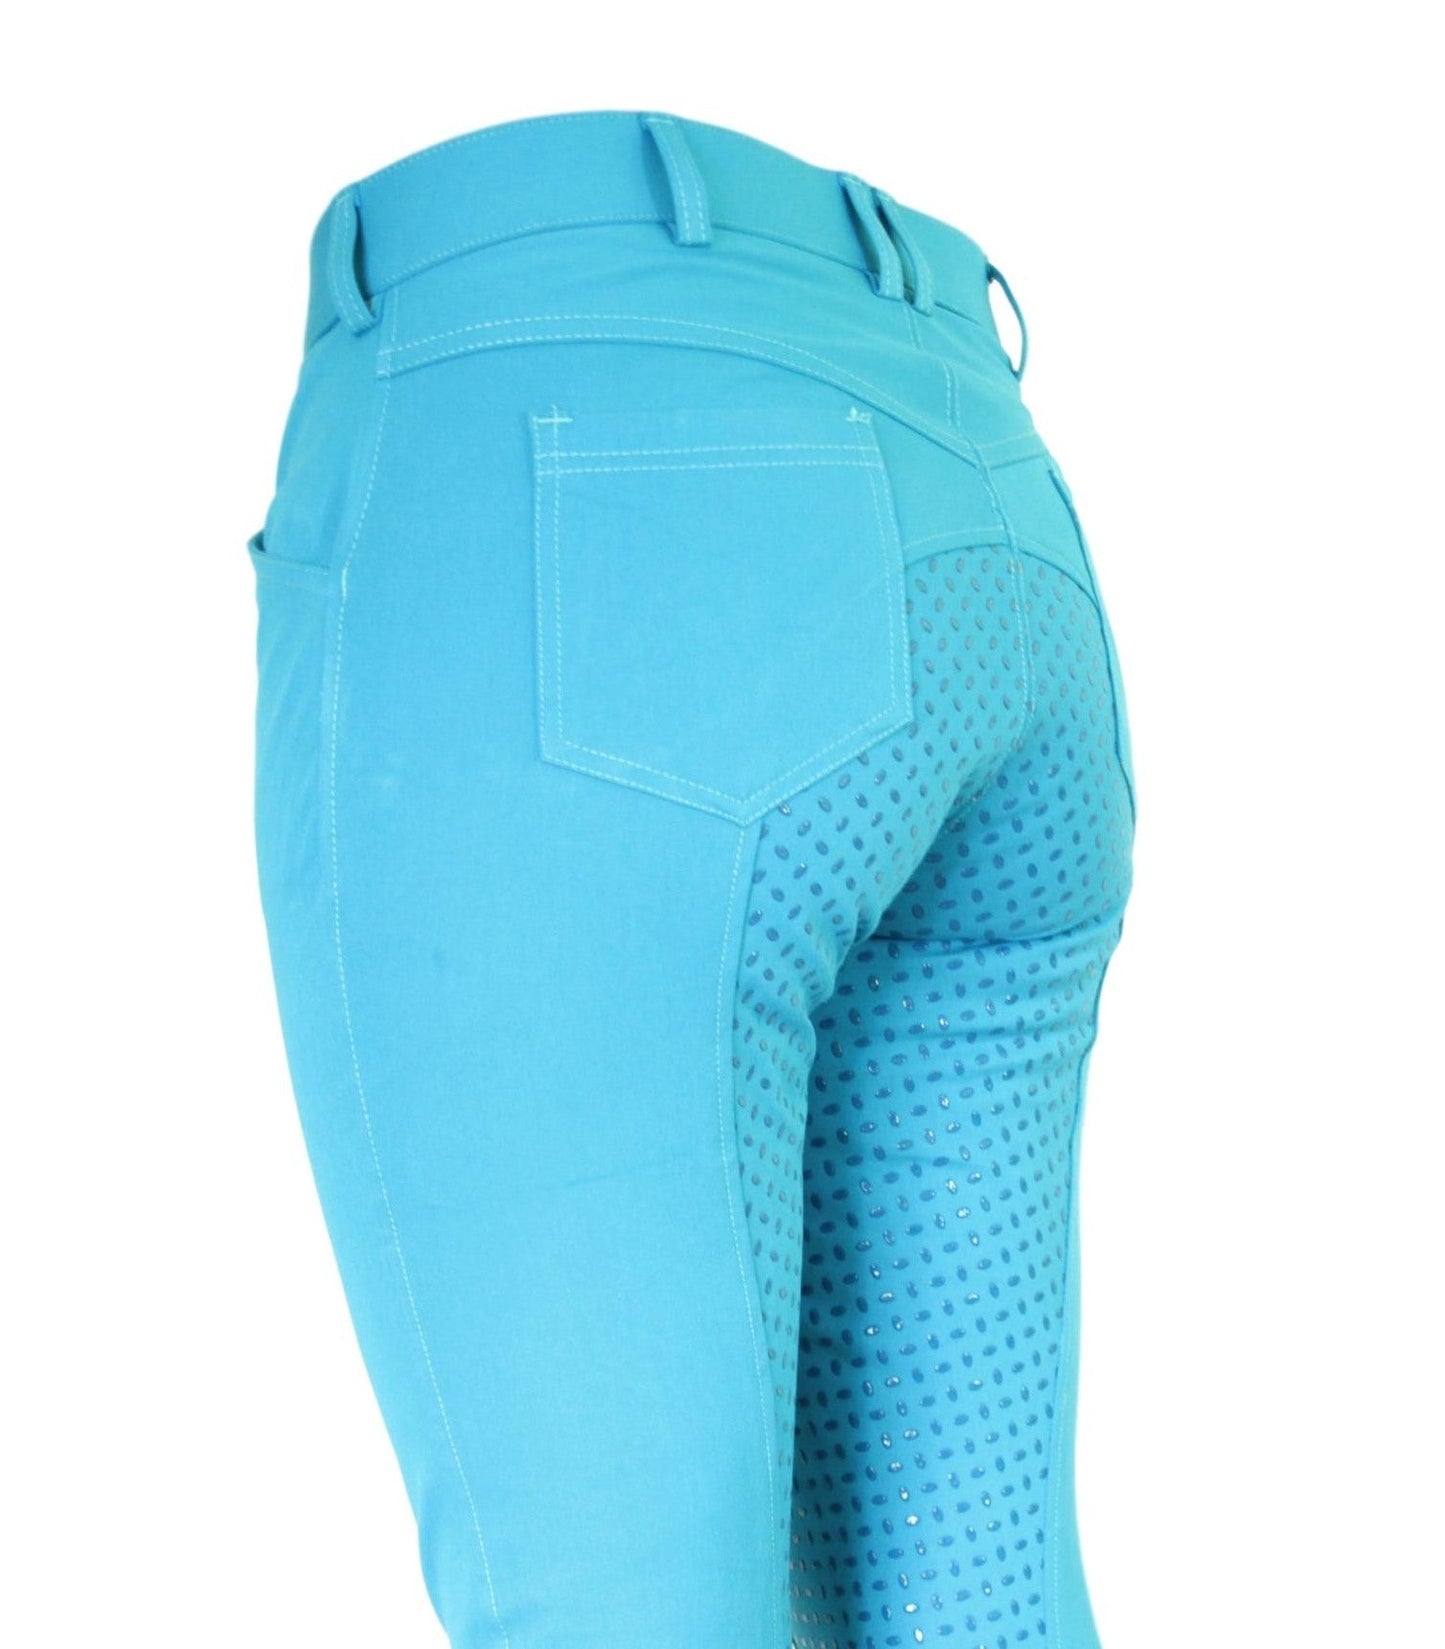 Micro Woven Cotton Blend Jodhpurs in Turquoise - Final runout, Last sizes-Plum Tack-The Equestrian